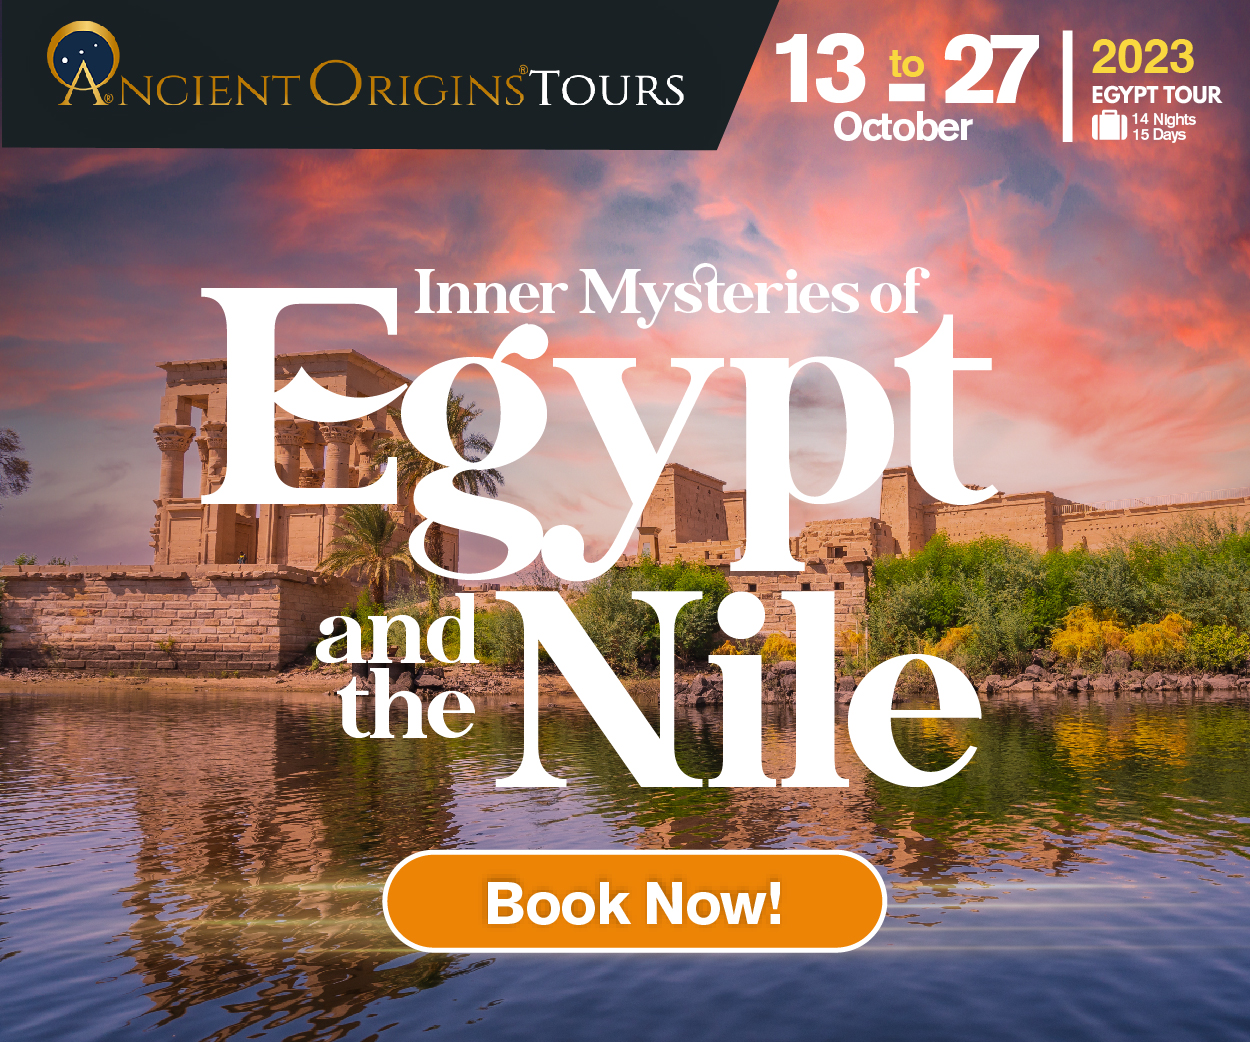 The Nile River: Map, History, Facts, Location, Source - Egypt Tours Portal